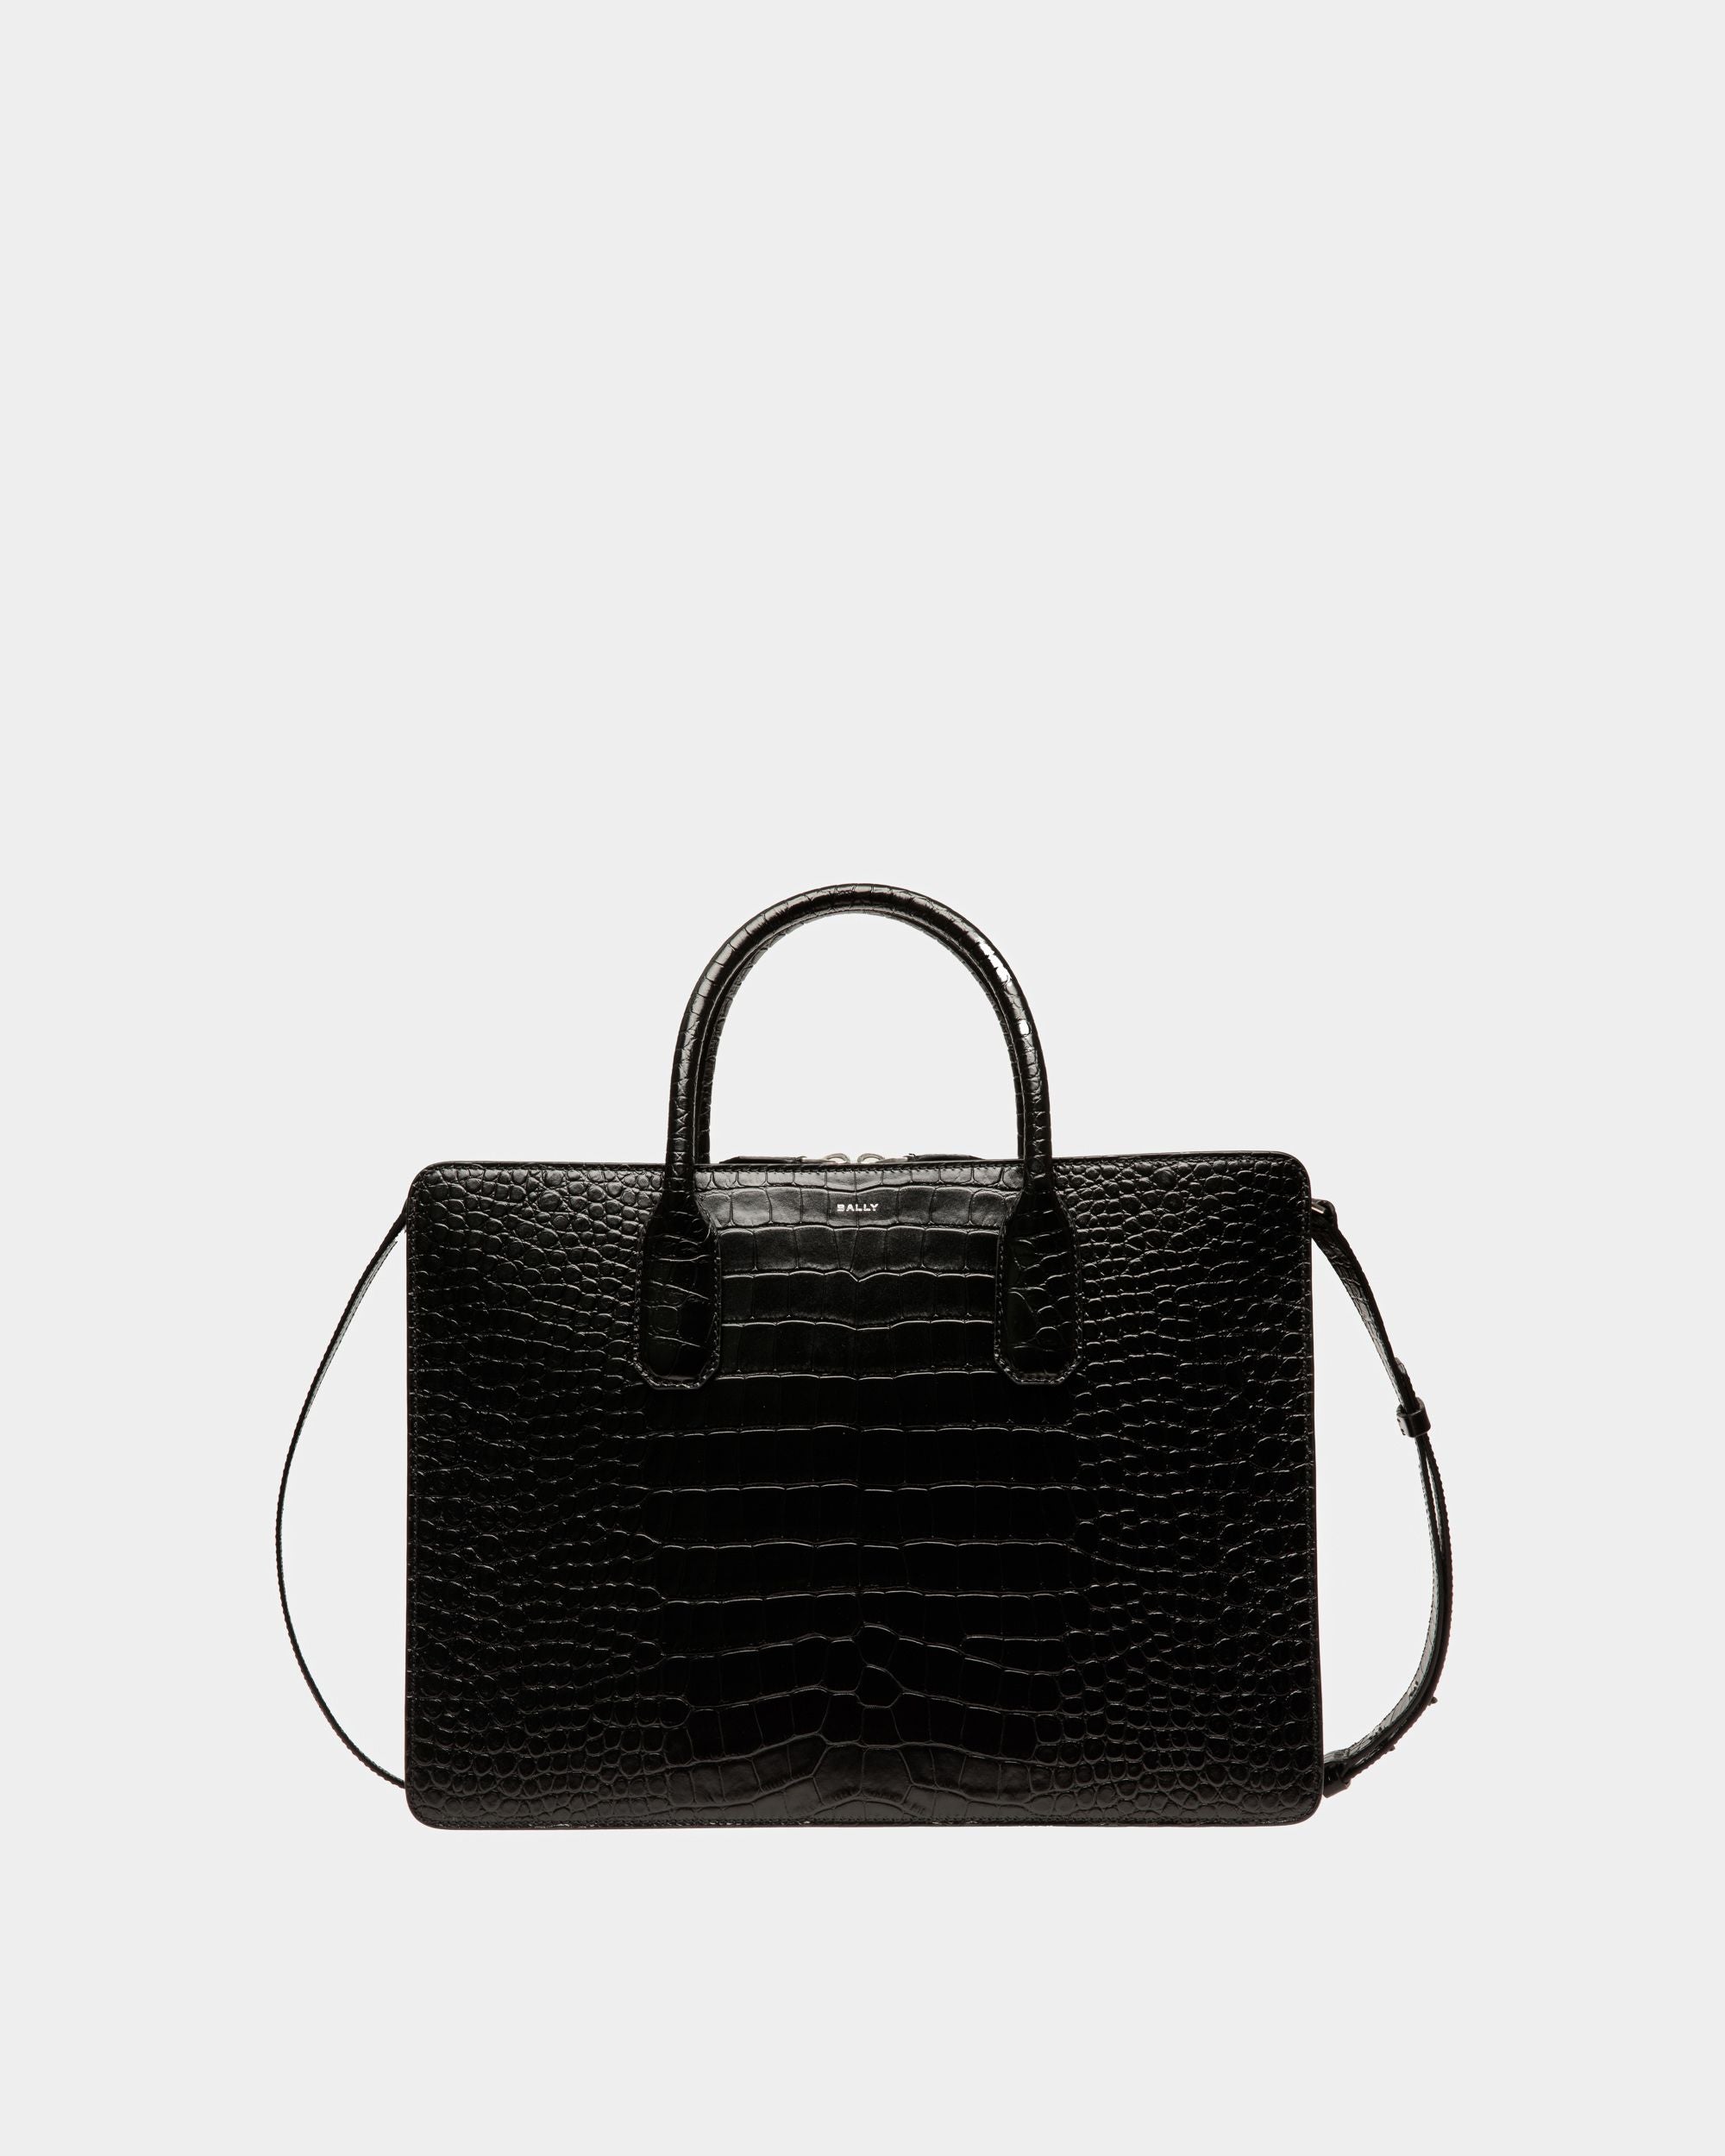 Busy | Men's Business Bag | Black Leather | Bally | Still Life Front